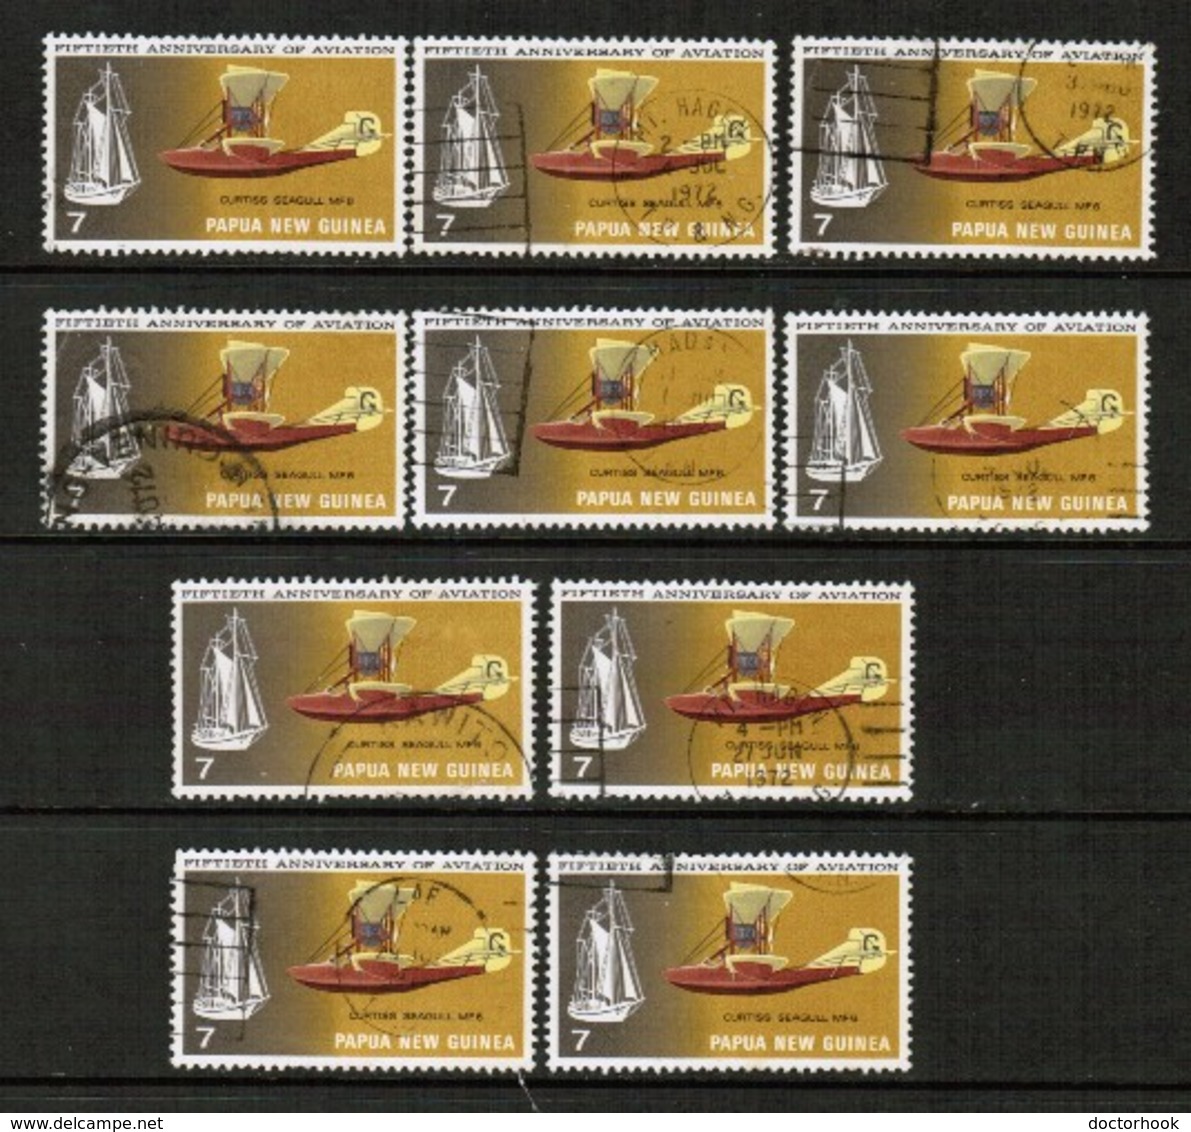 PAPUA NEW GUINEA  Scott # 348 USED WHOLESALE LOT OF 10 (WH-409) - Lots & Kiloware (mixtures) - Max. 999 Stamps